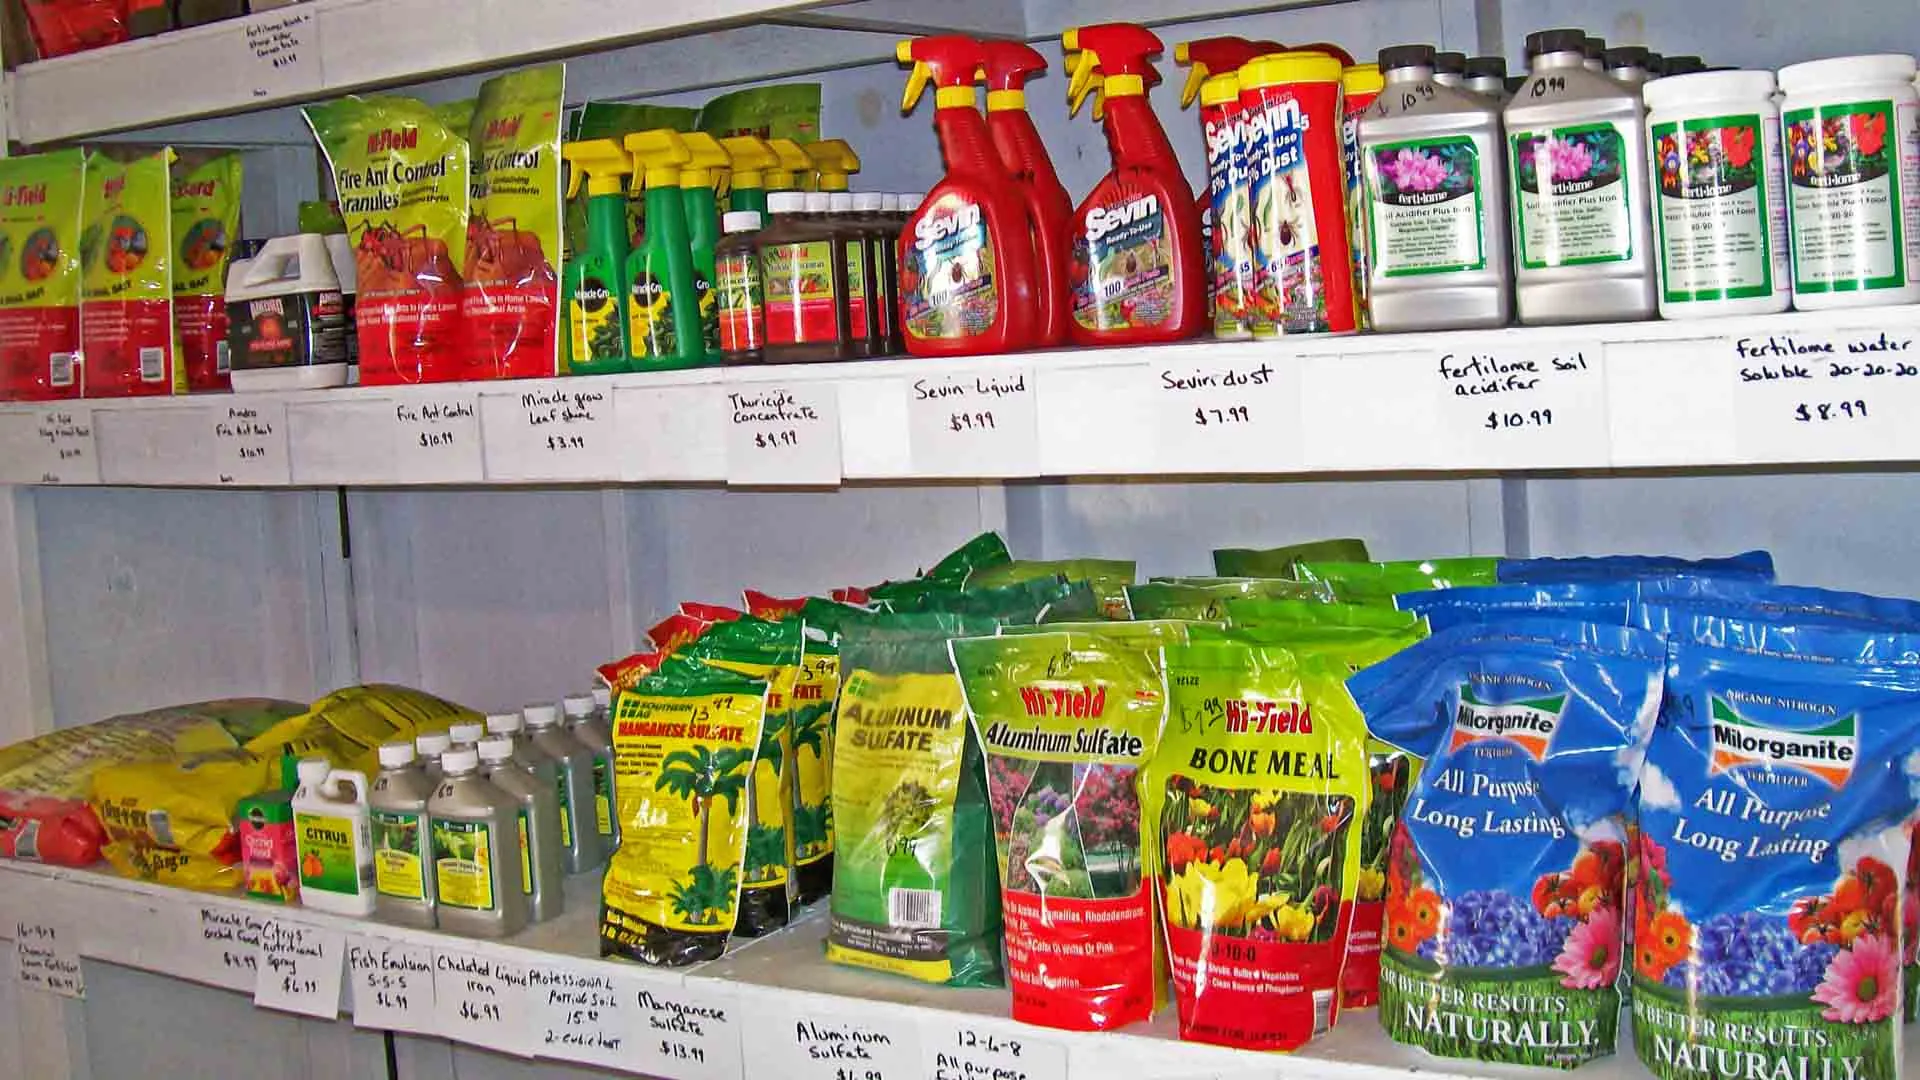 Fertilizer, Nutrients and Supplies at Sunman's Nursery